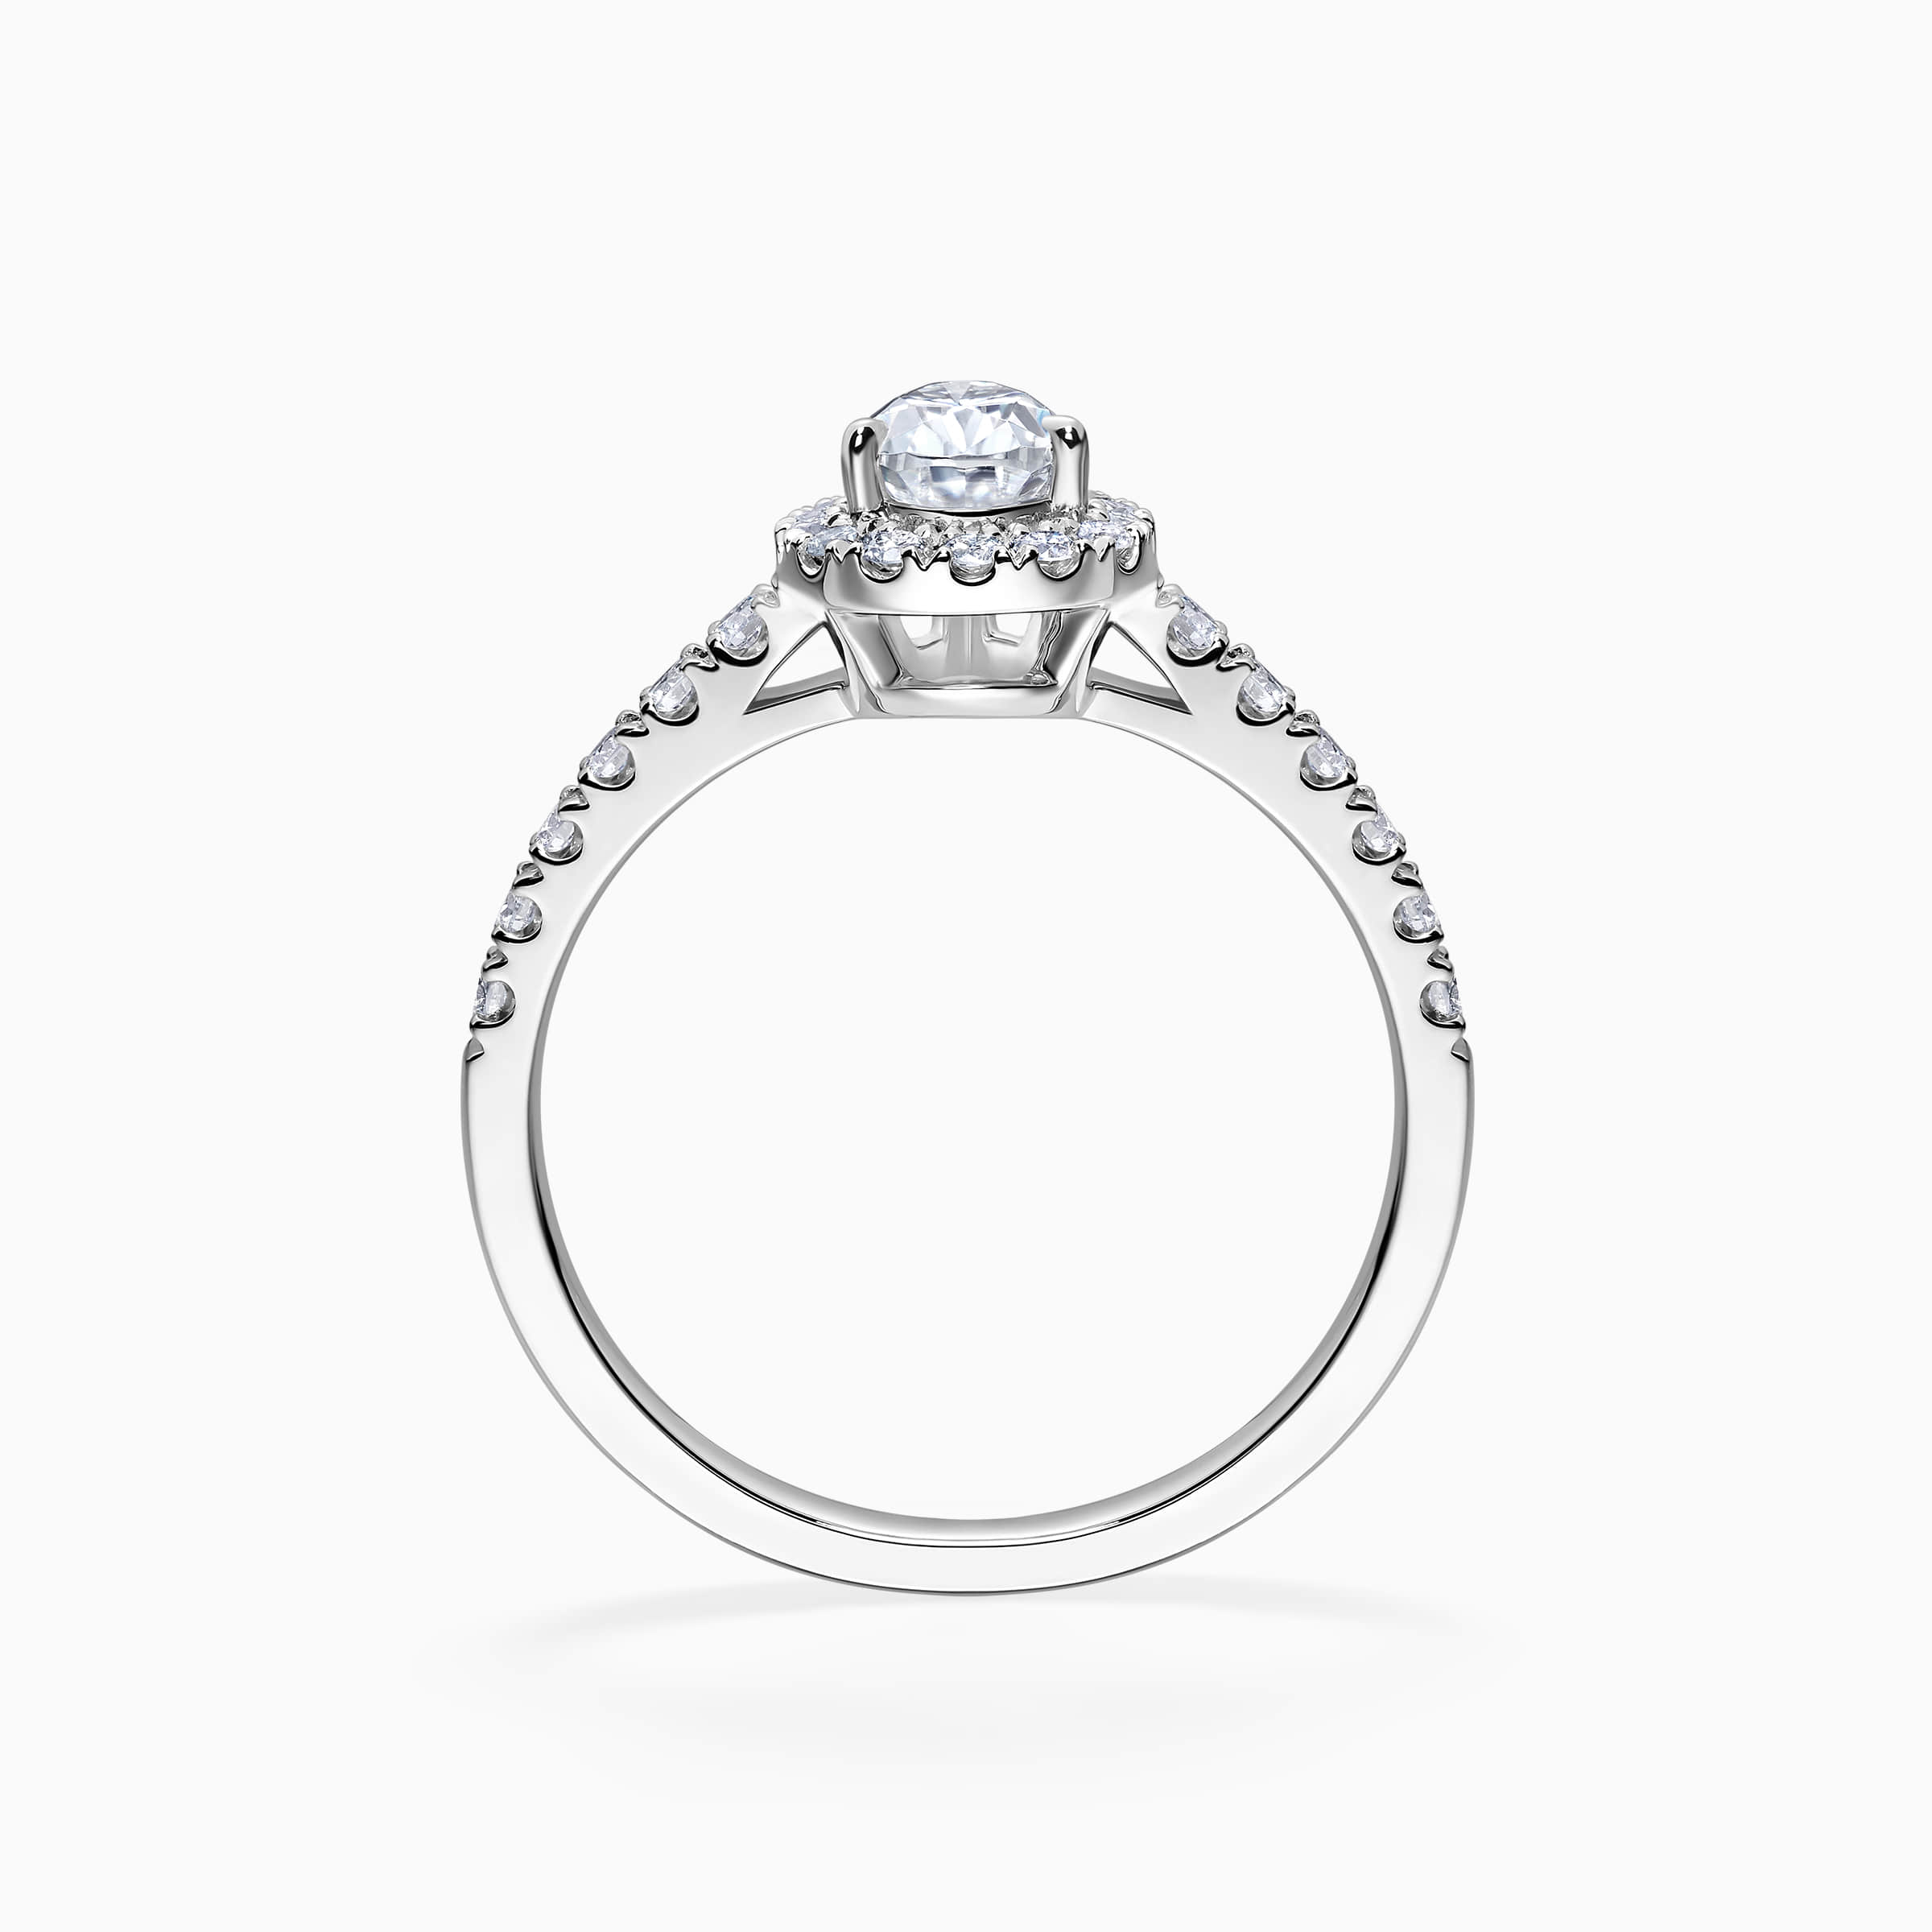 Darry Ring teardrop engagement ring front view